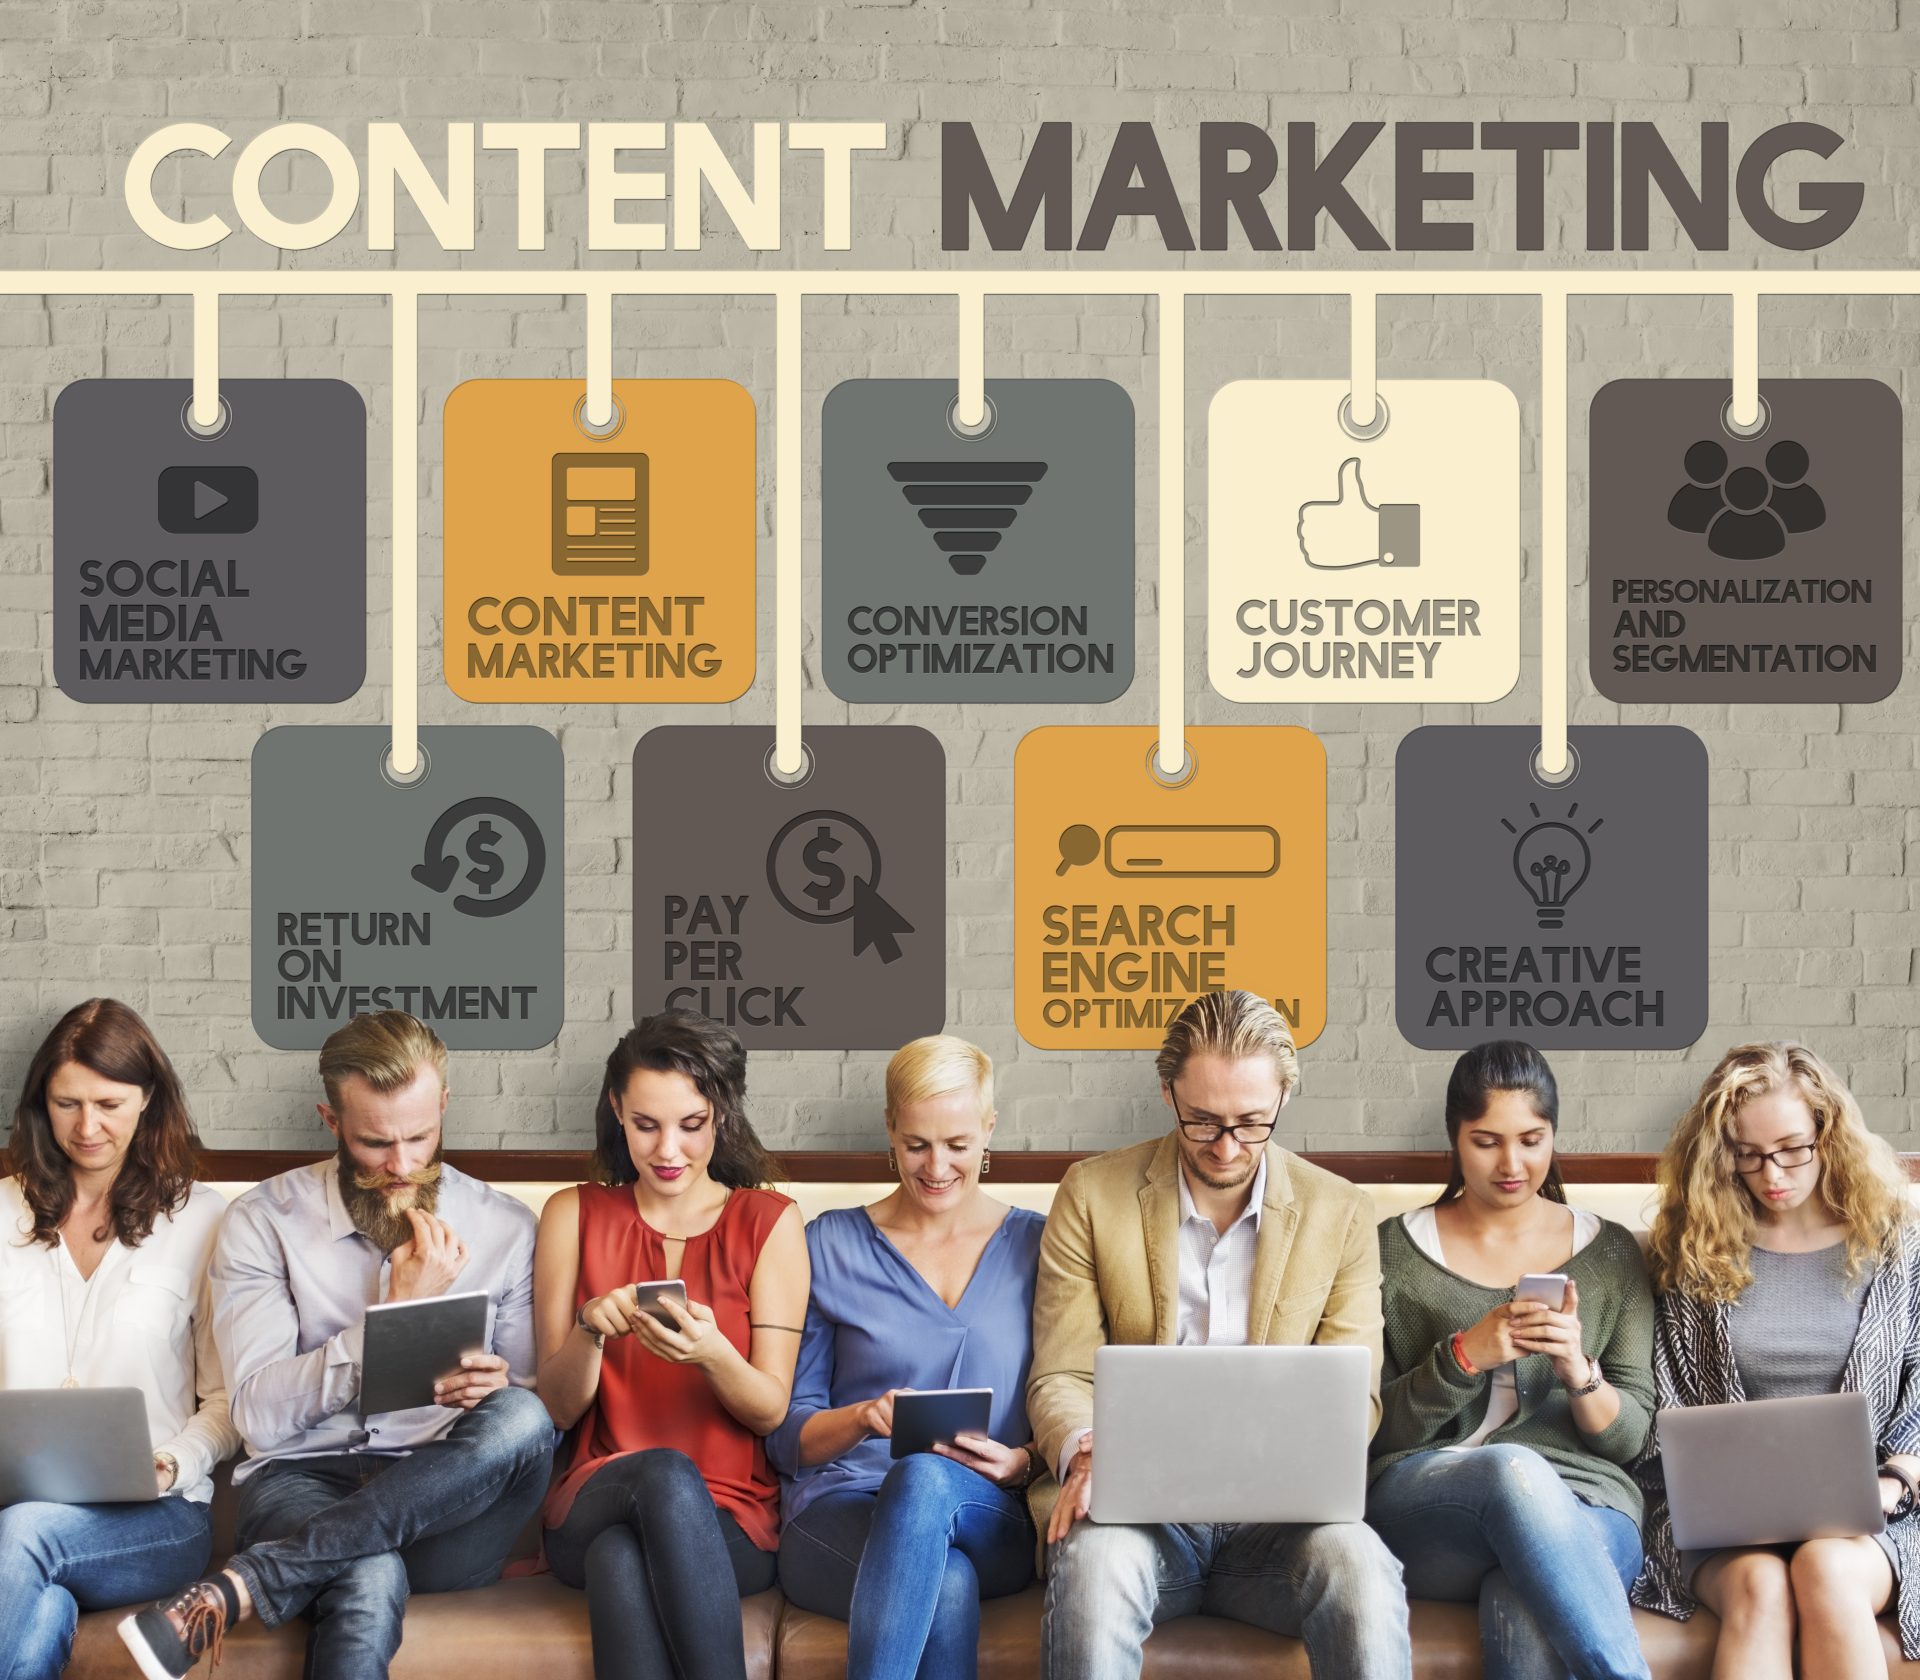 people sit with devices and Content Marketing